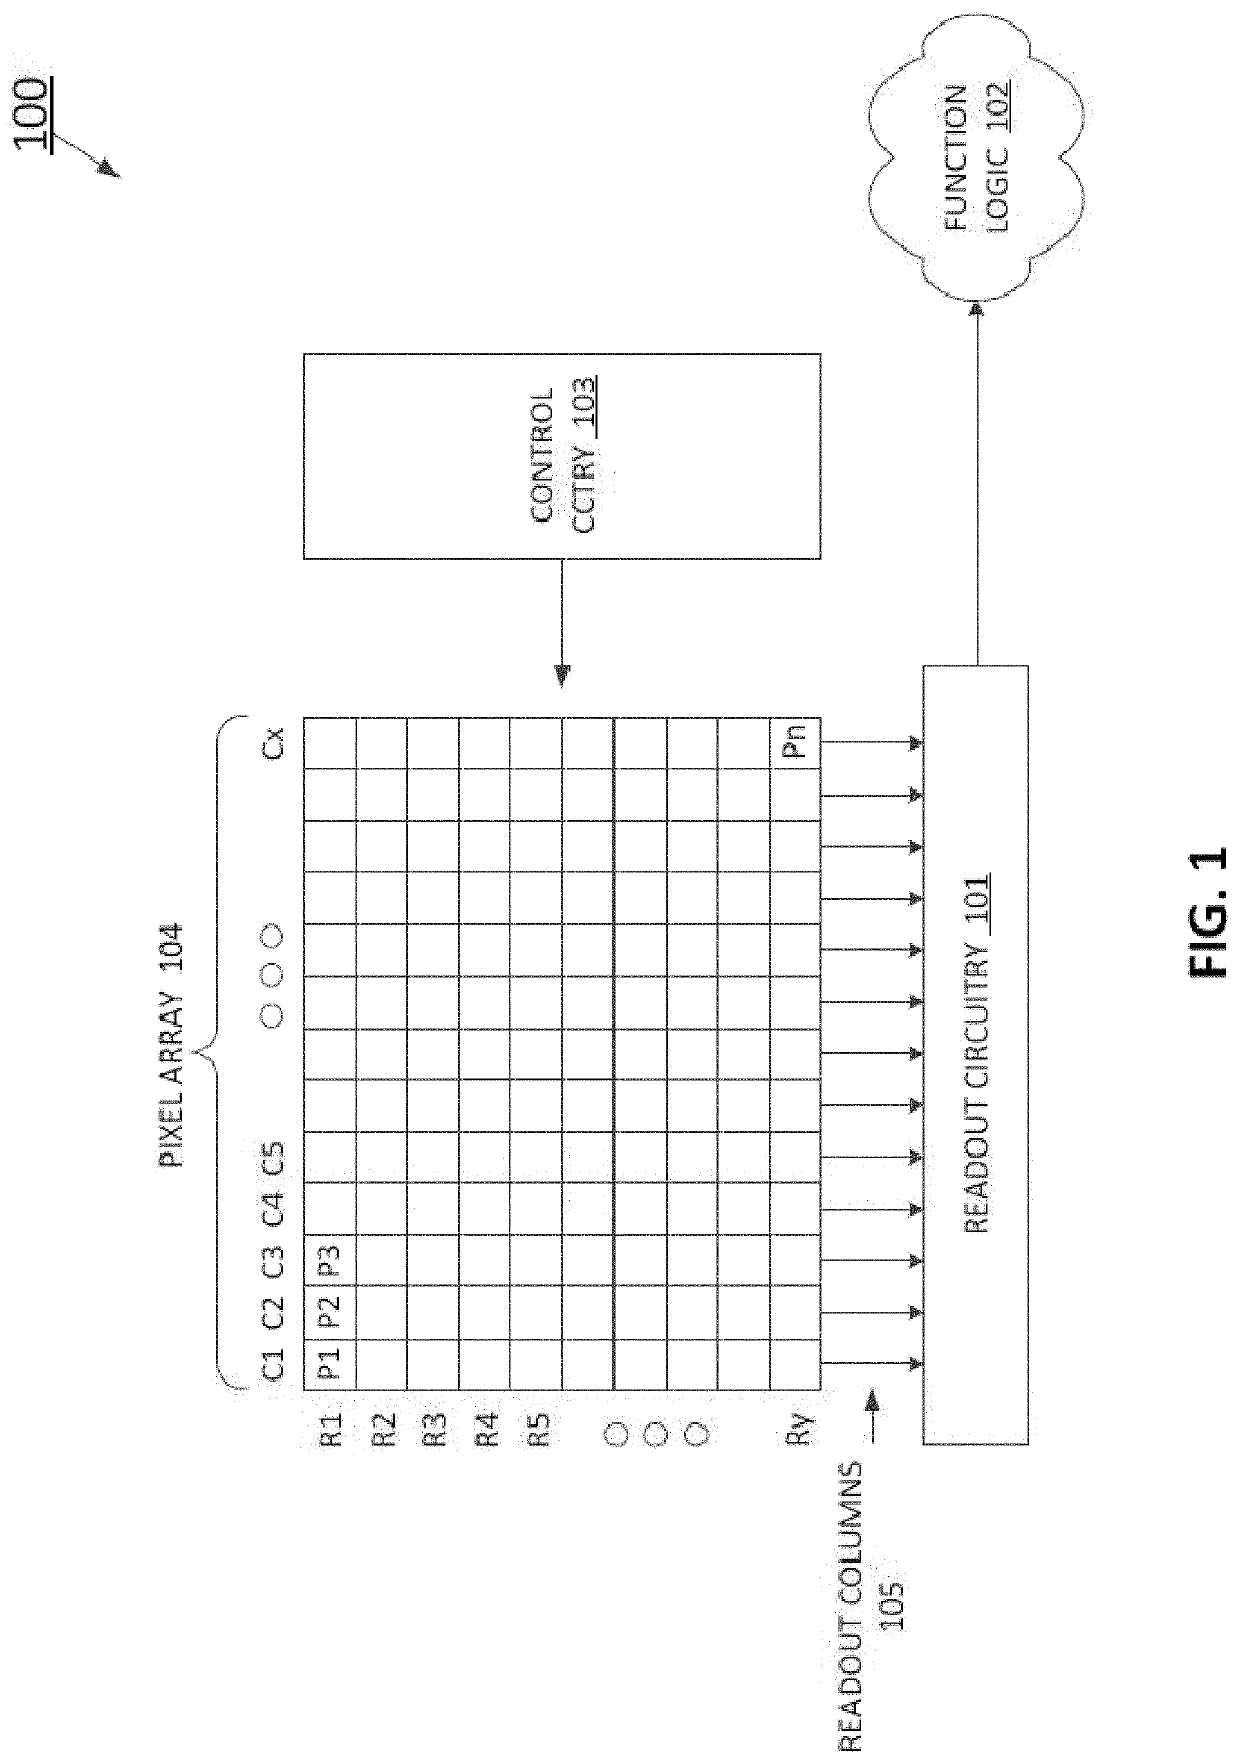 CMOS image sensor with multiple stage transfer gate